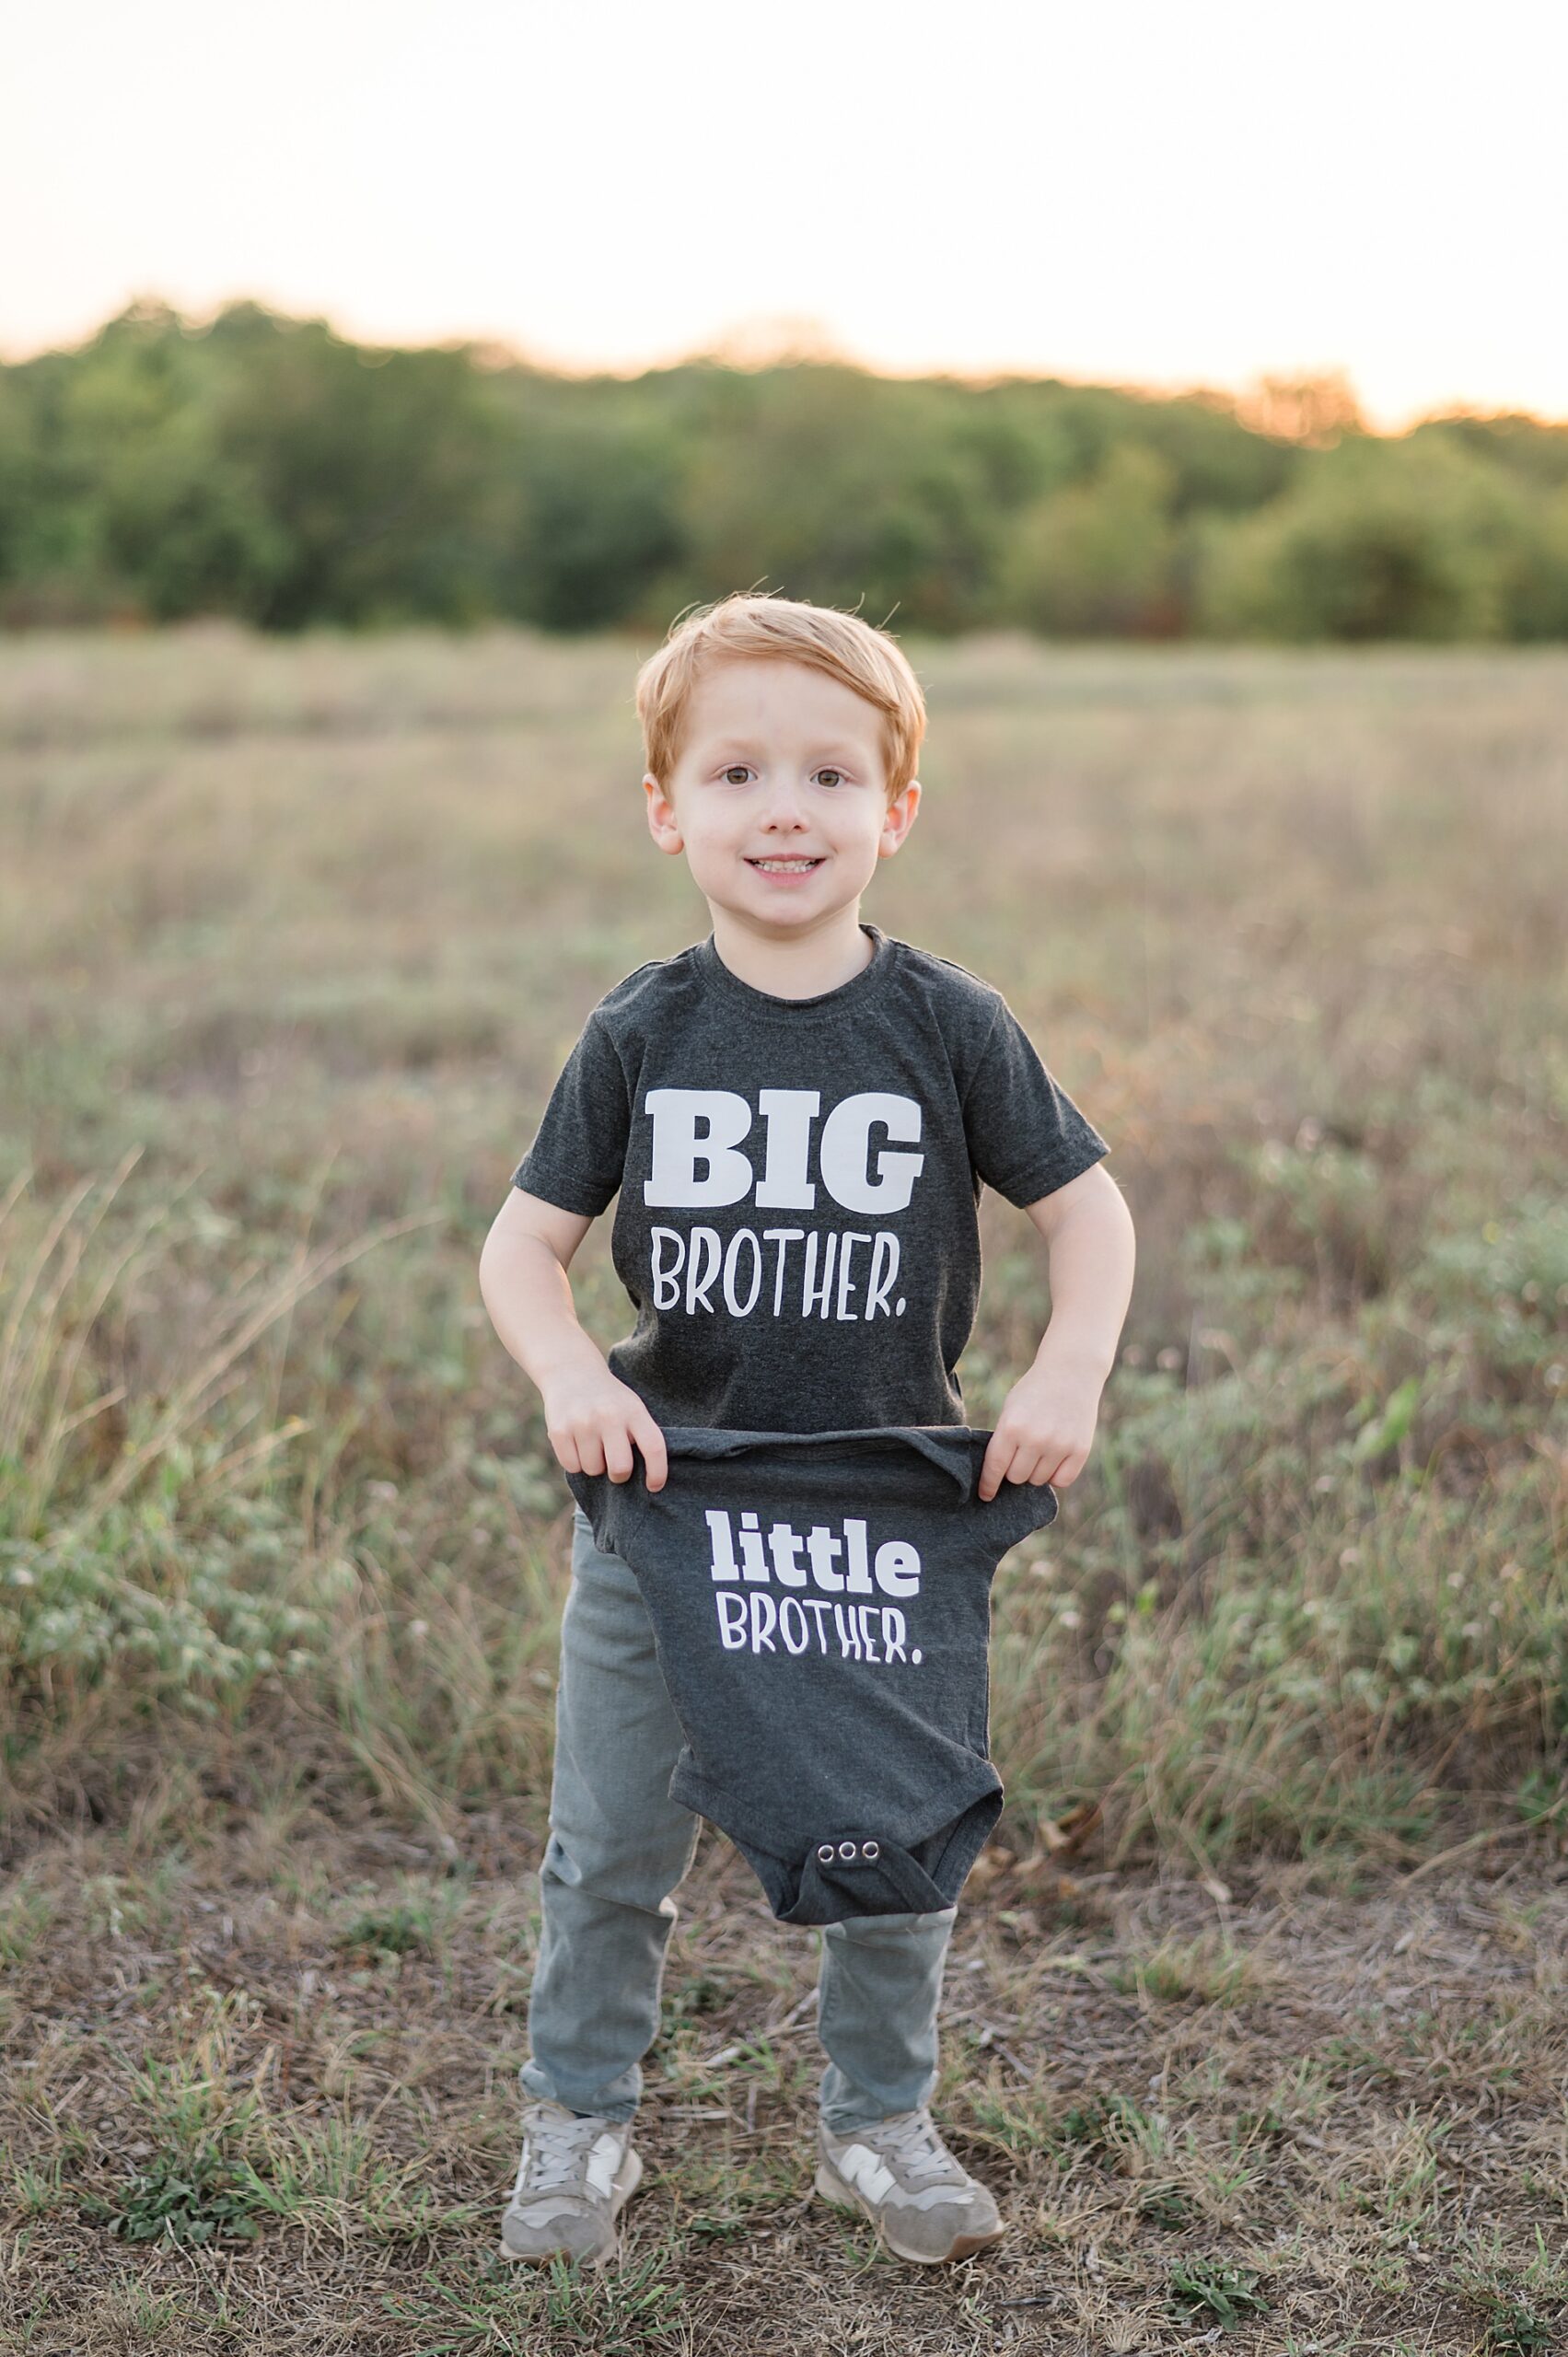 boy in big brother shirt holds up little brother onesie during pregnancy announcement photoshoot taken by Lindsey Dutton Photography, a Dallas maternity photographer
